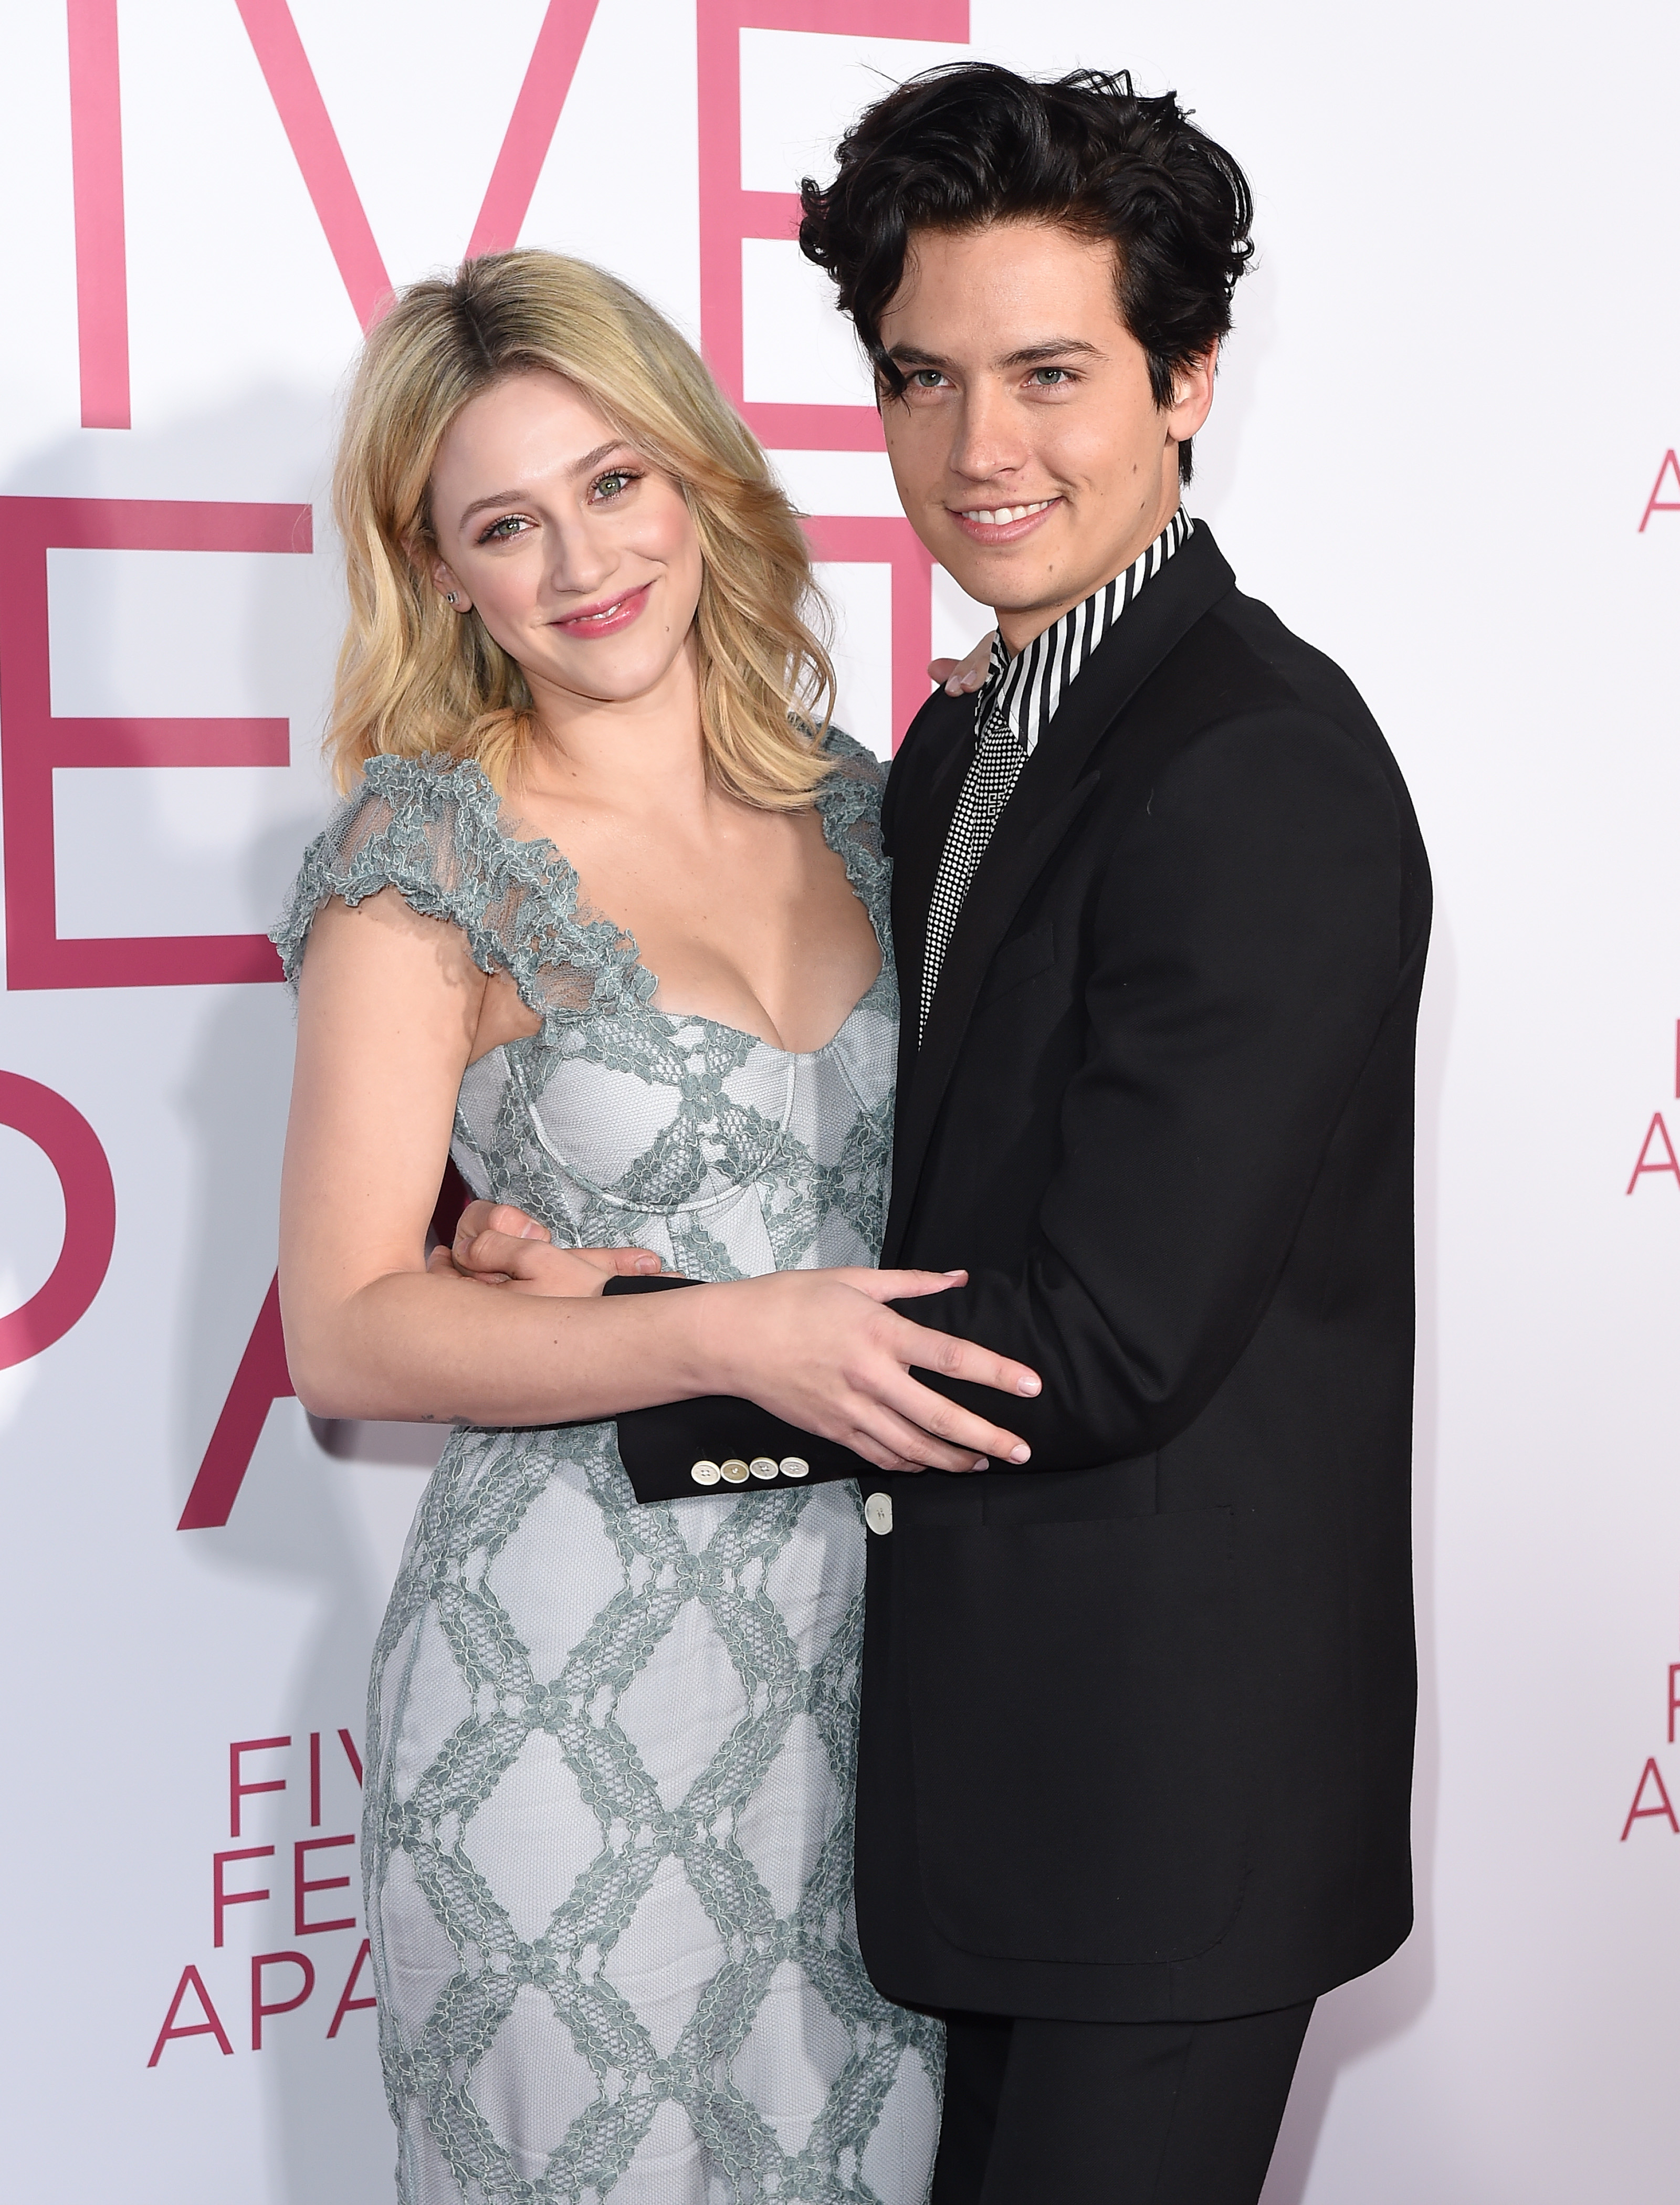 Lili smiling in a ruffled dress, Cole smiling in a black suit with striped collar